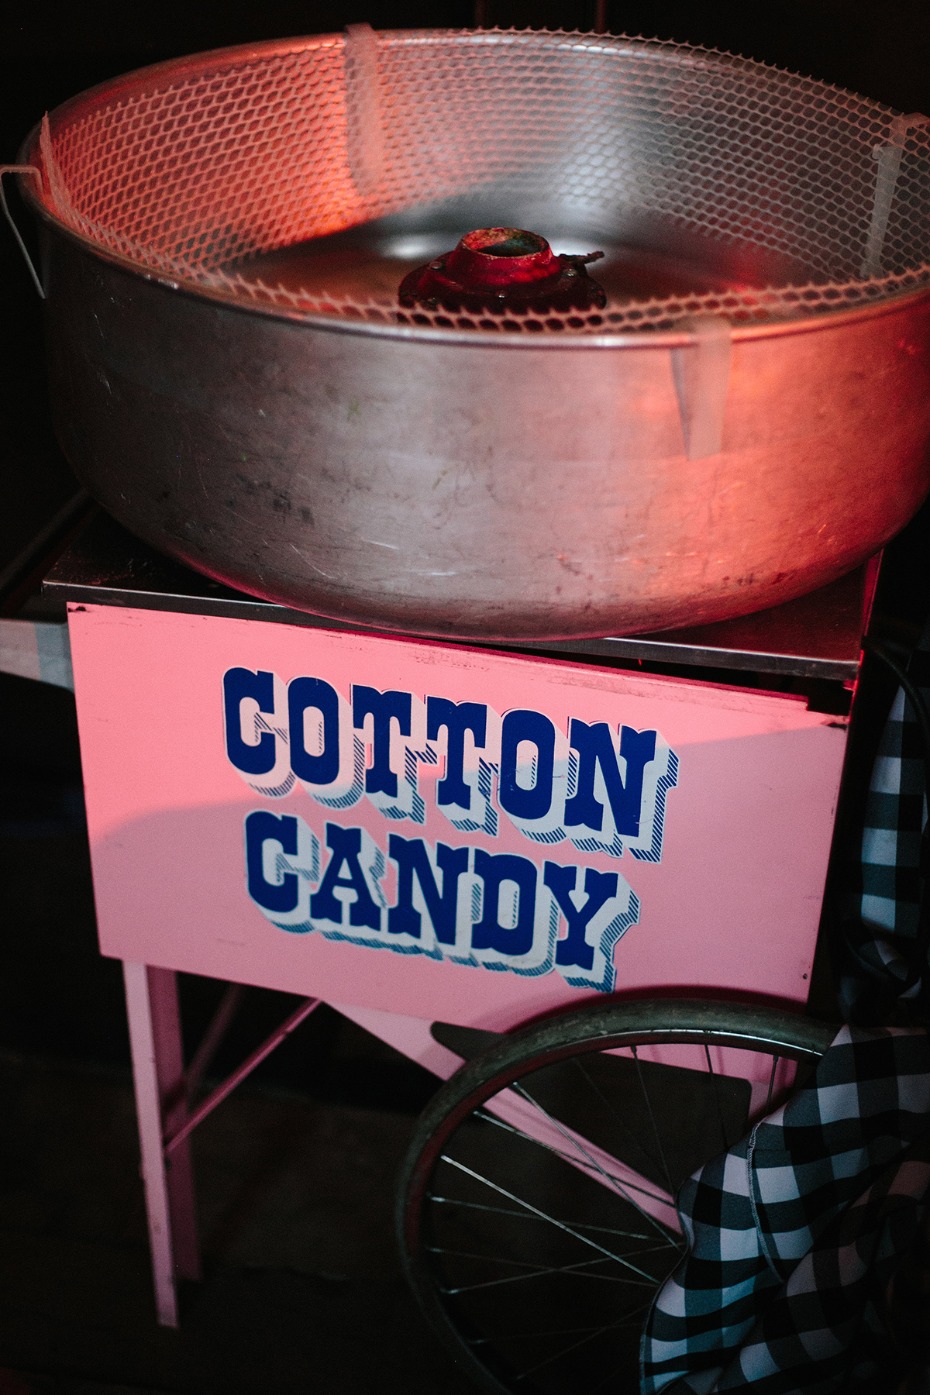 Cotton candy station